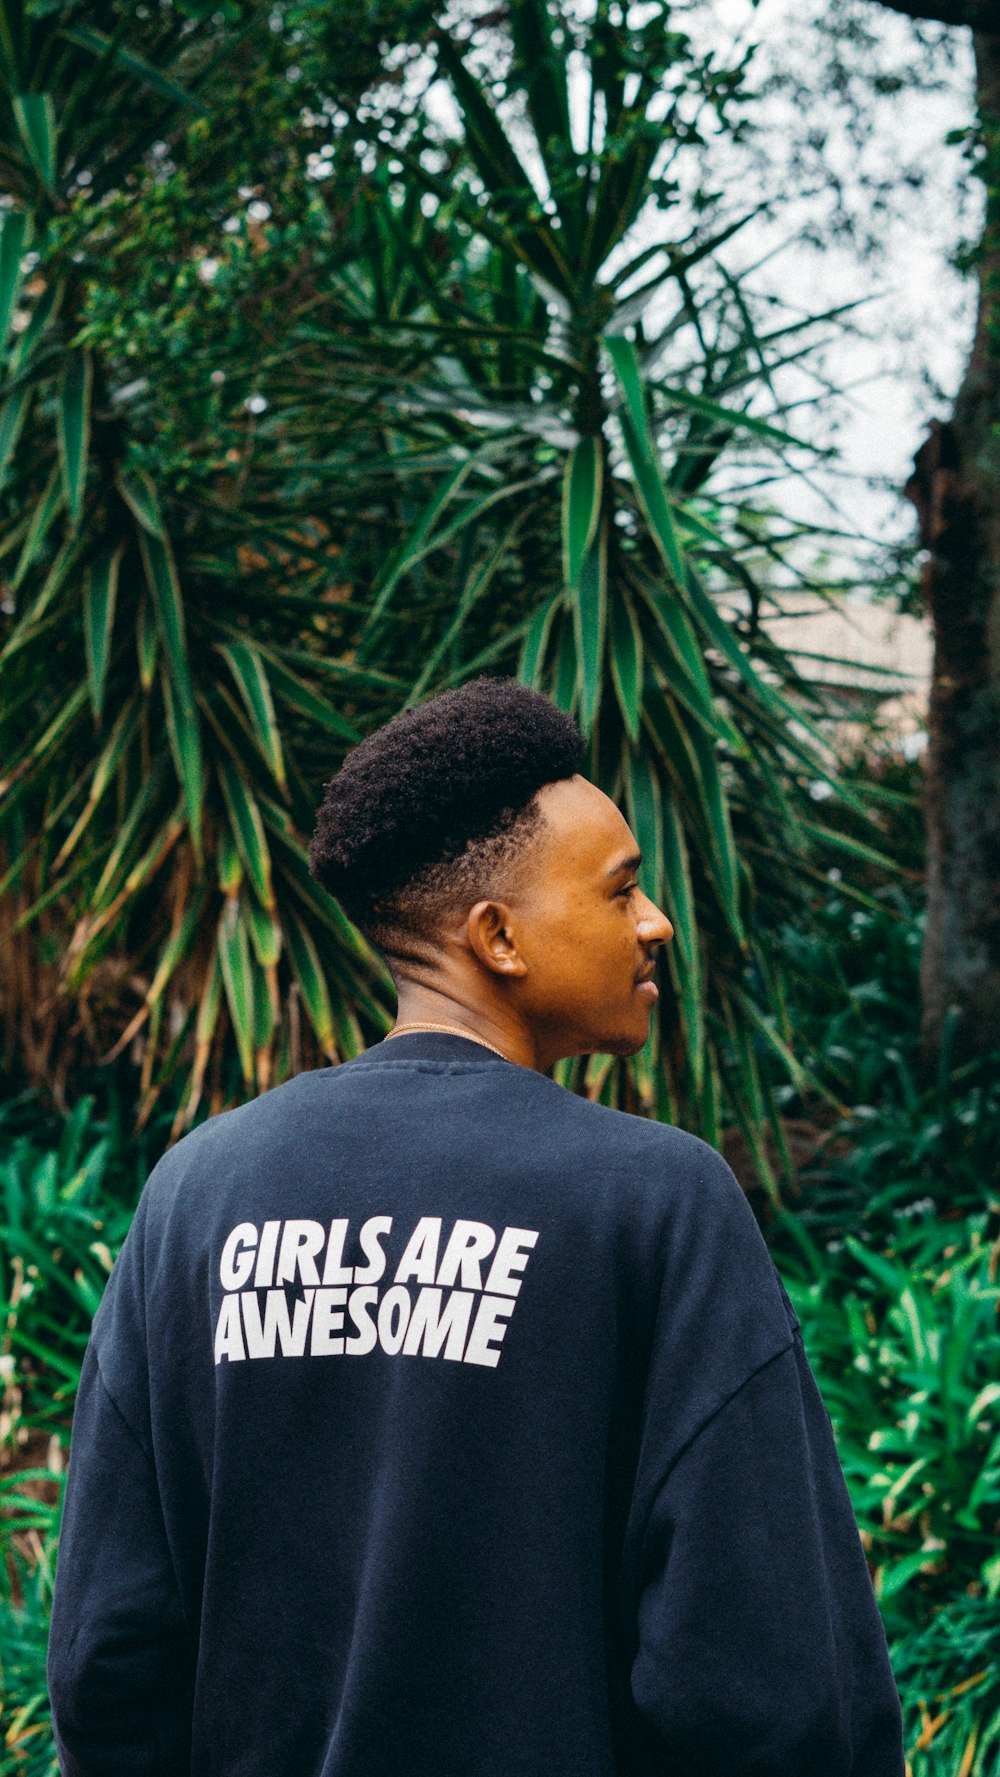 a man wearing a black sweatshirt that says girls are awesome